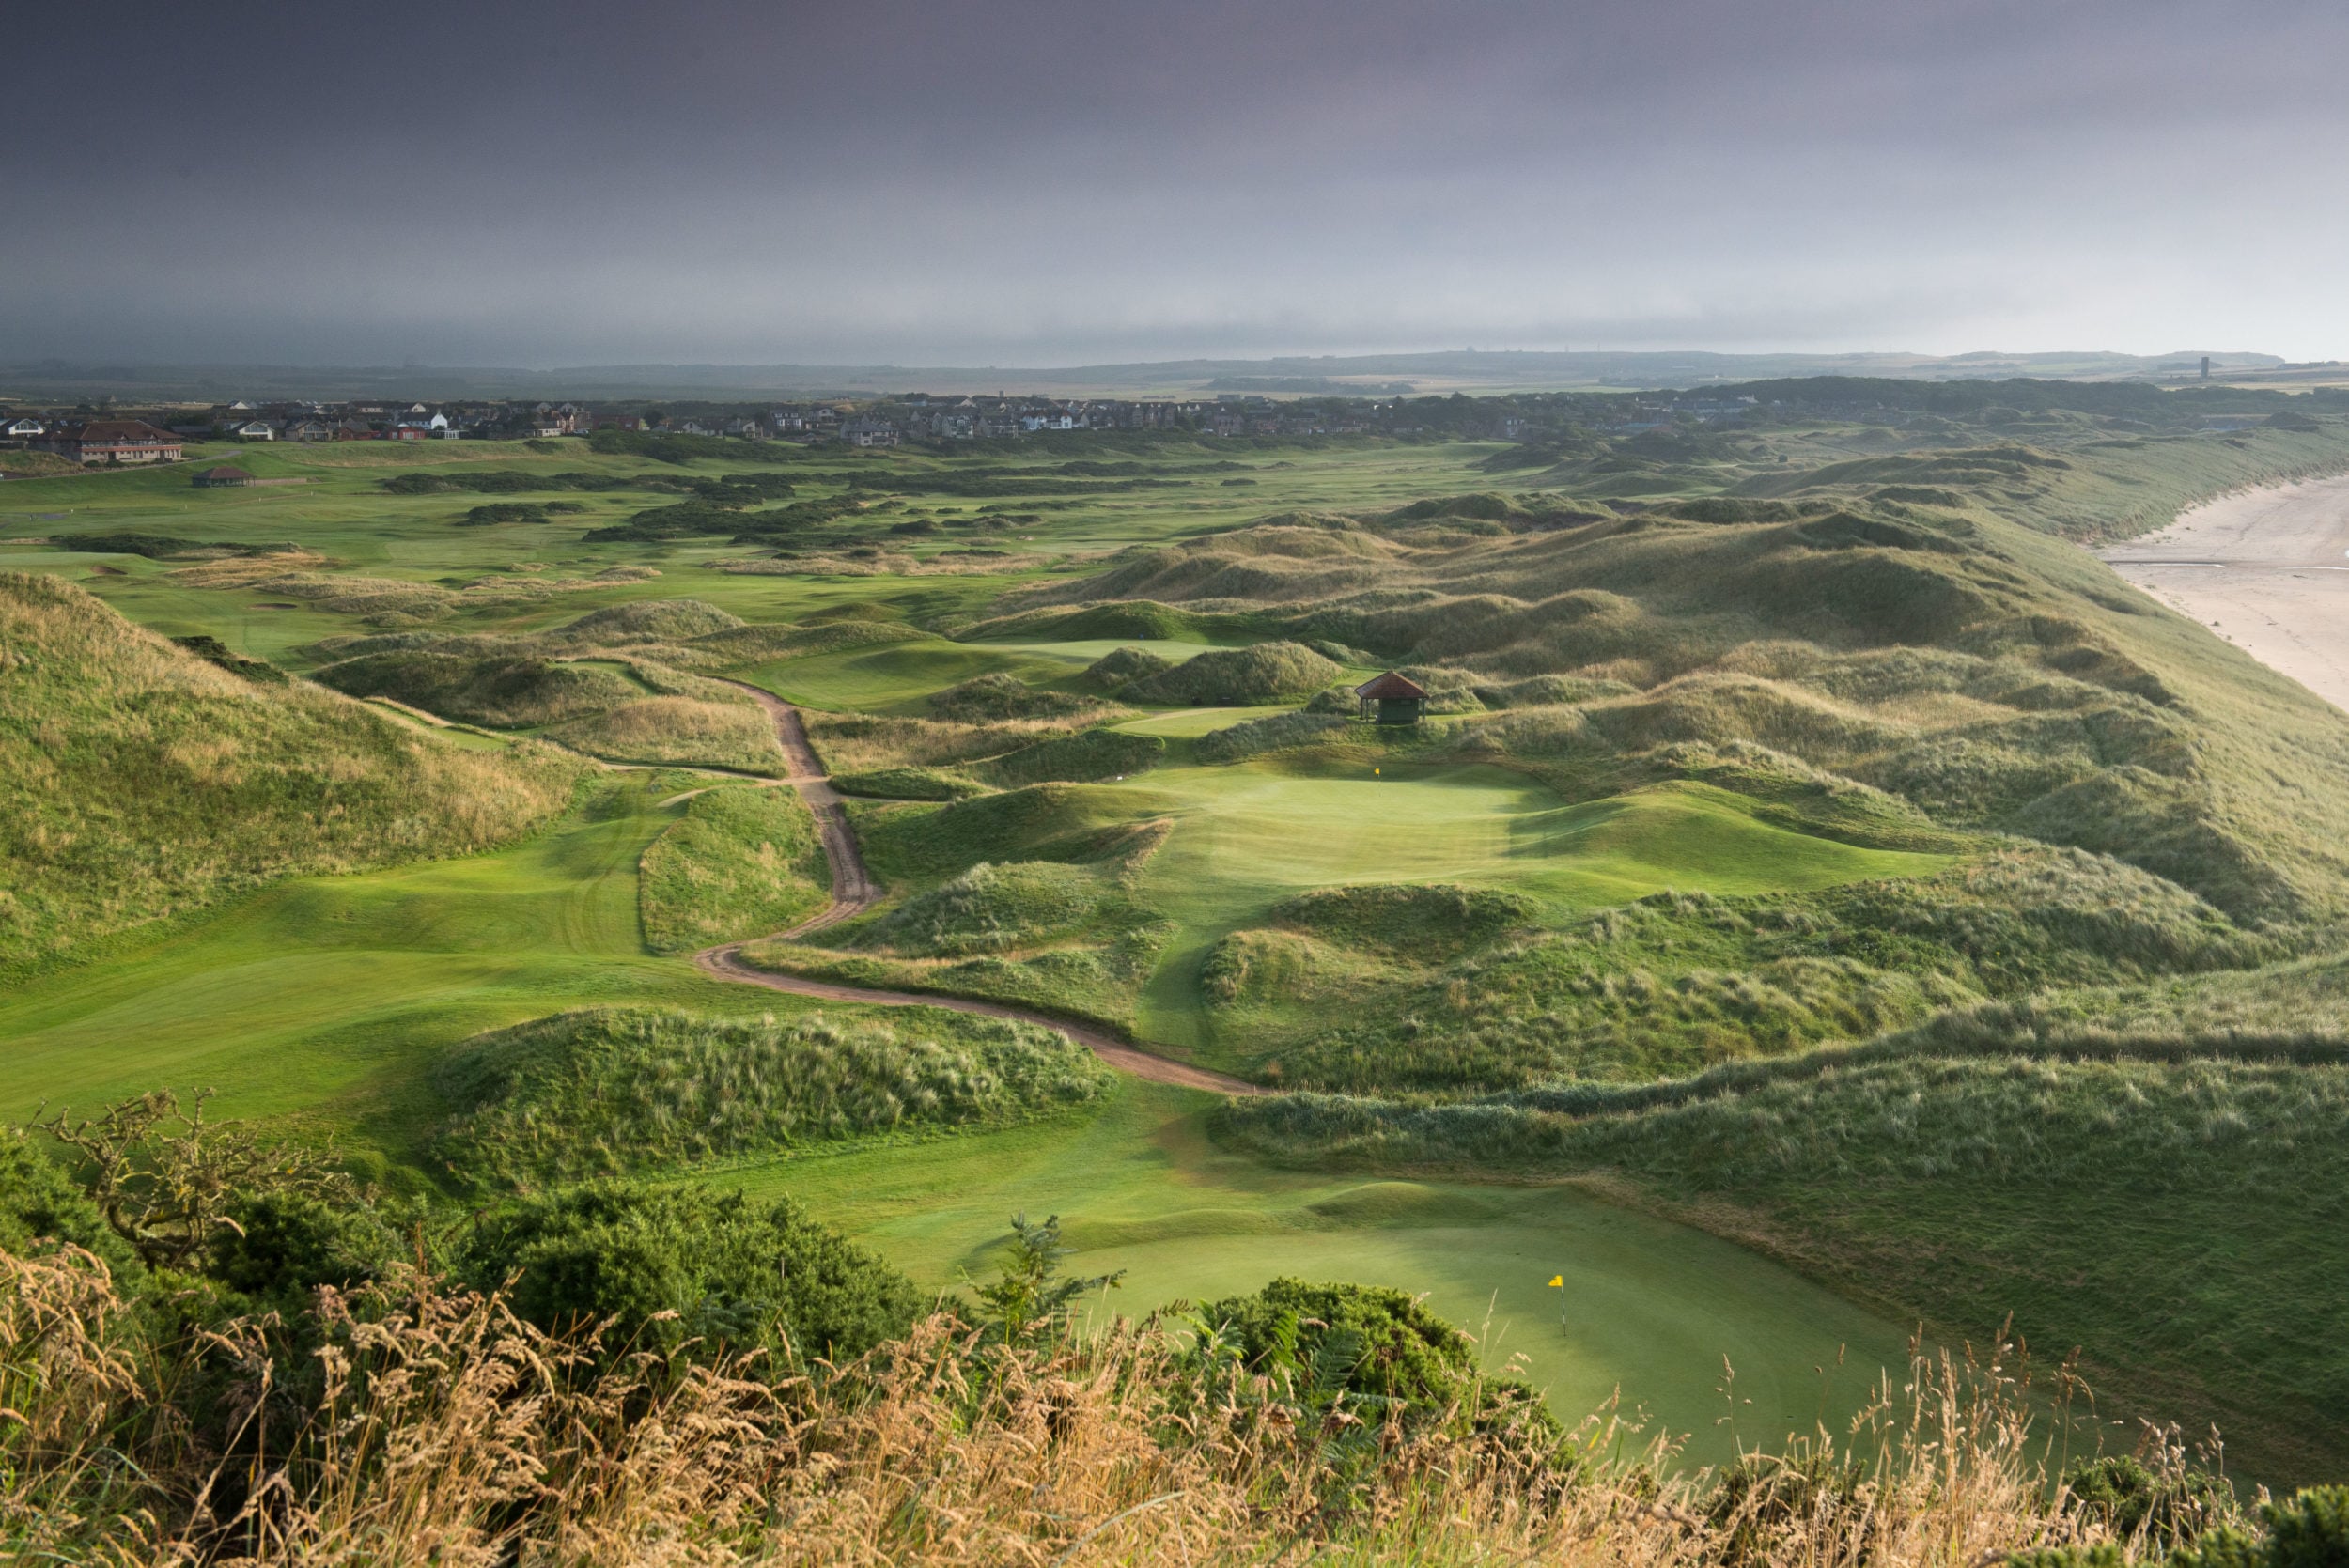 Image taken from a tee box looking down on the links golf course at Cruden Bay Golf course, Aberdeenshire, Scotland